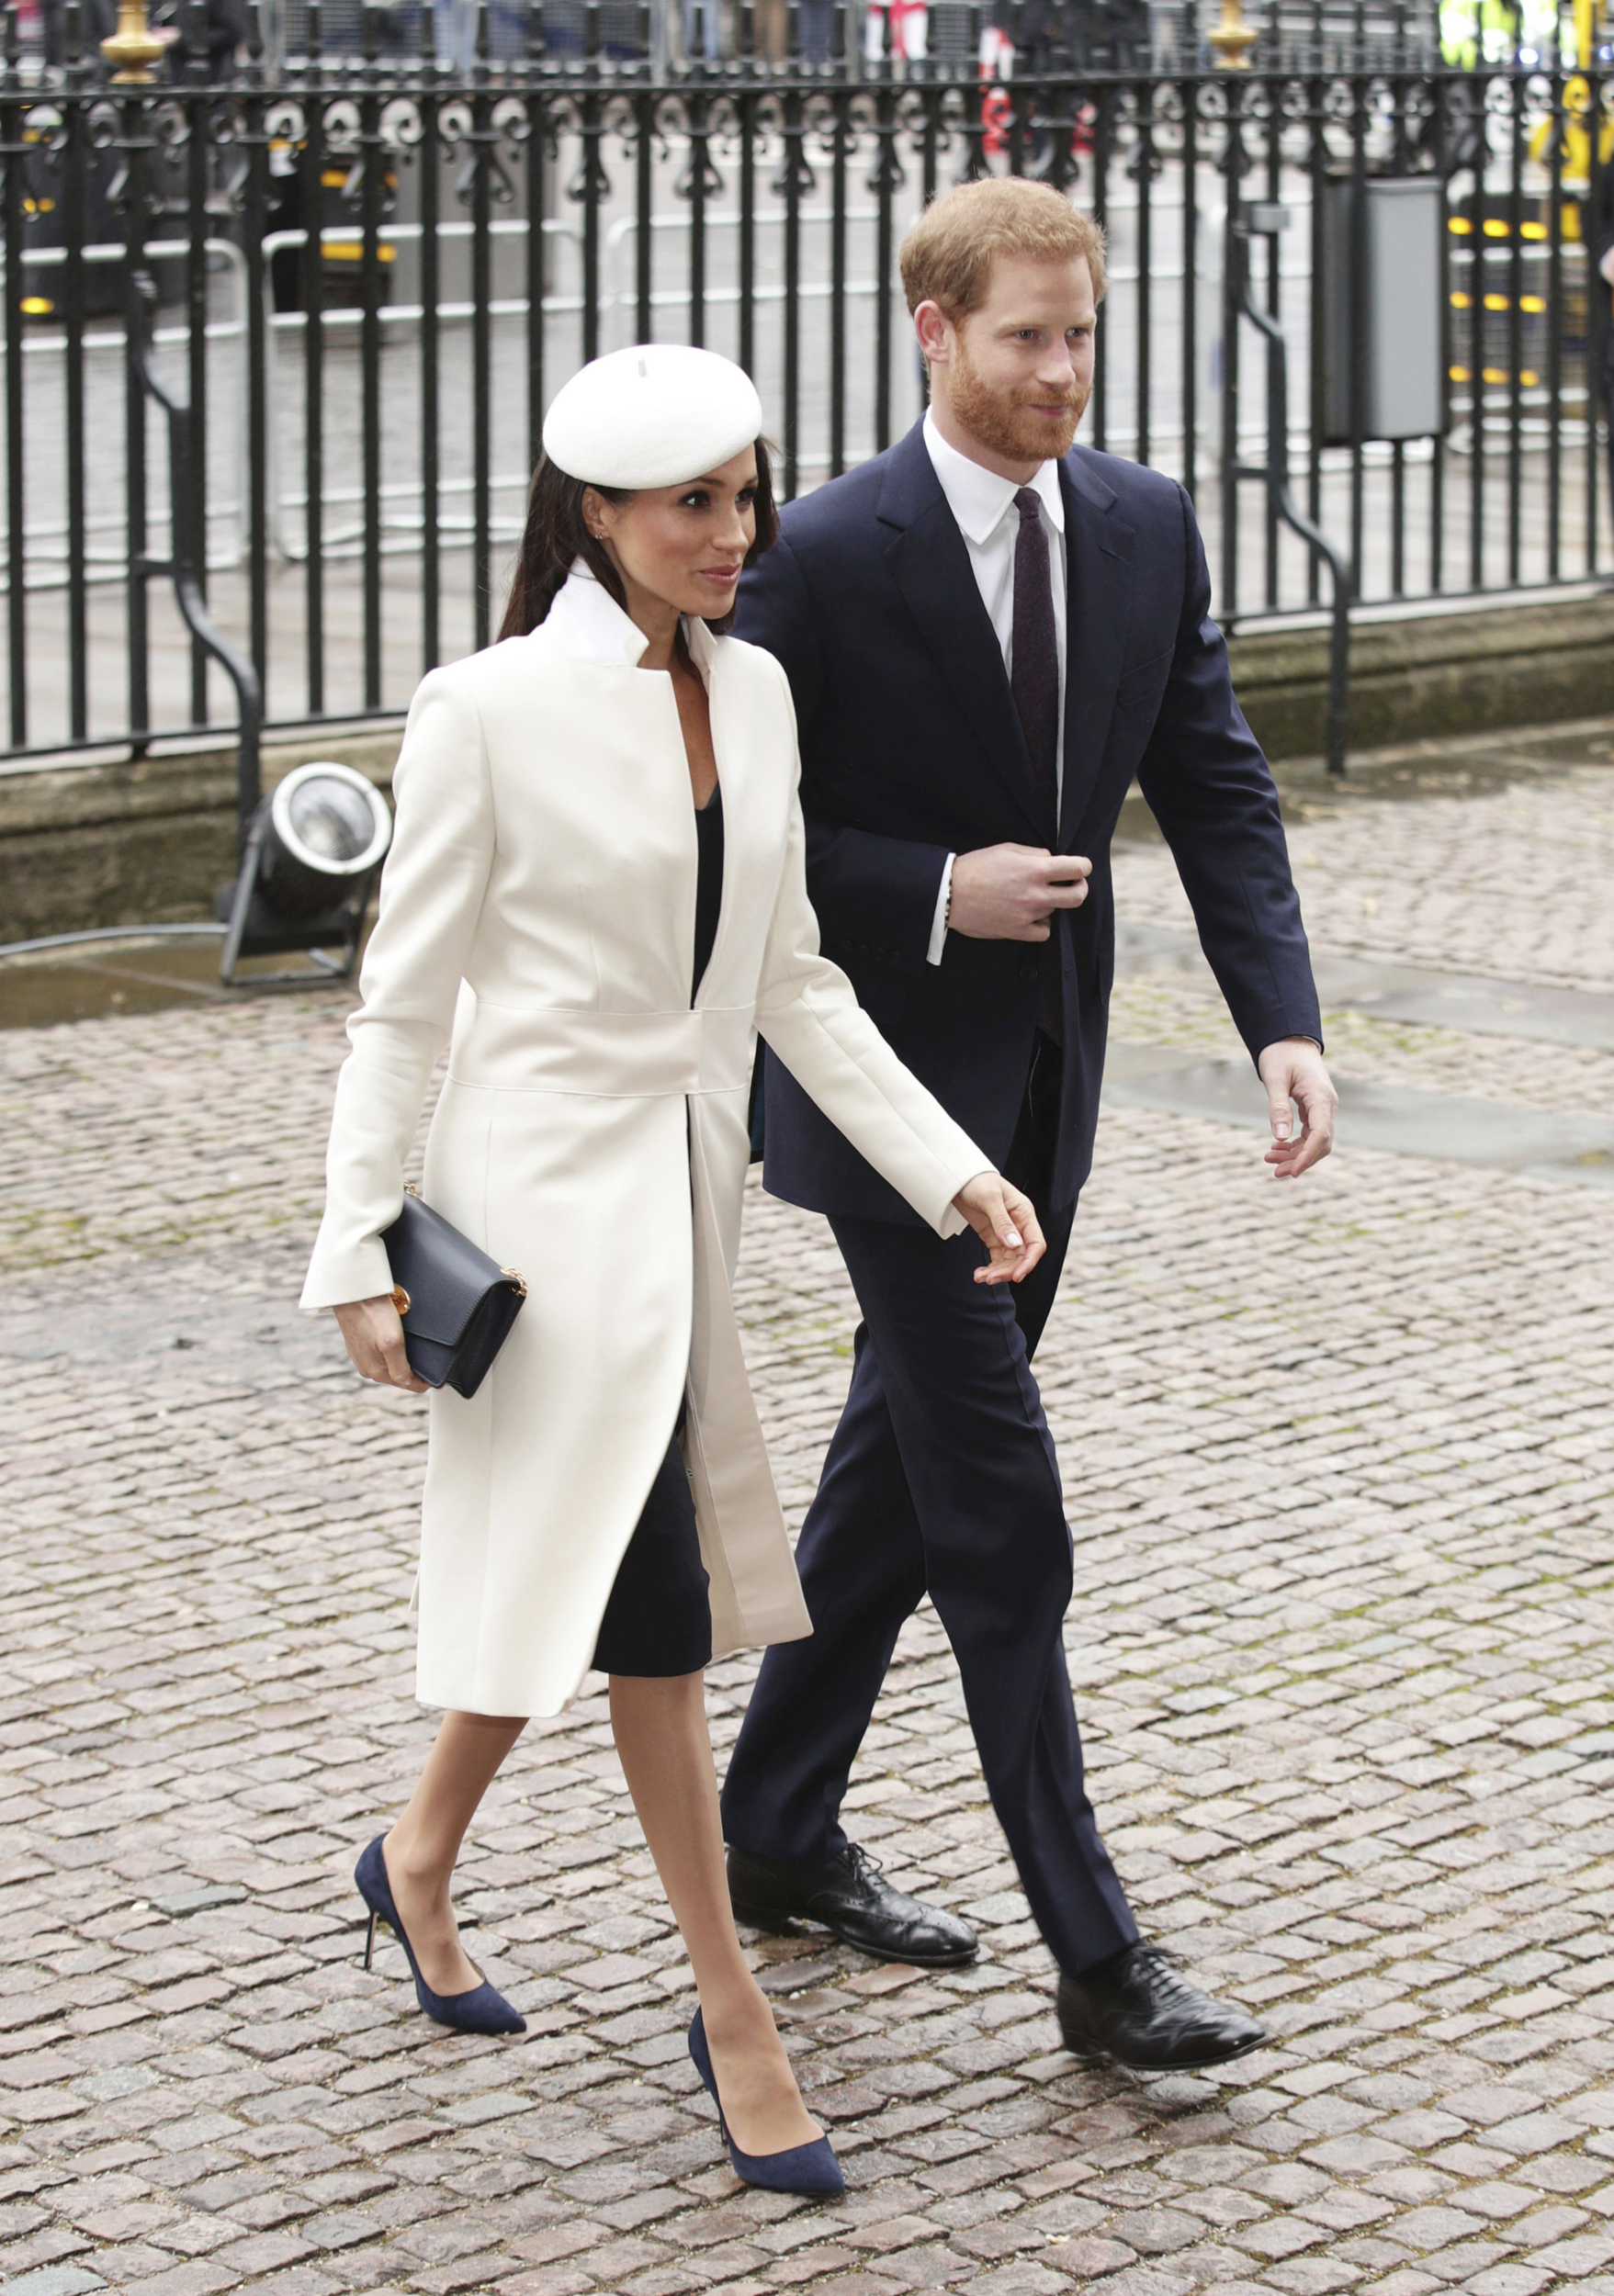 PHOTO: Britain's Prince Harry and Meghan Markle, arrive for the Commonwealth Service at Westminster Abbey in London, on March 12, 2018. 